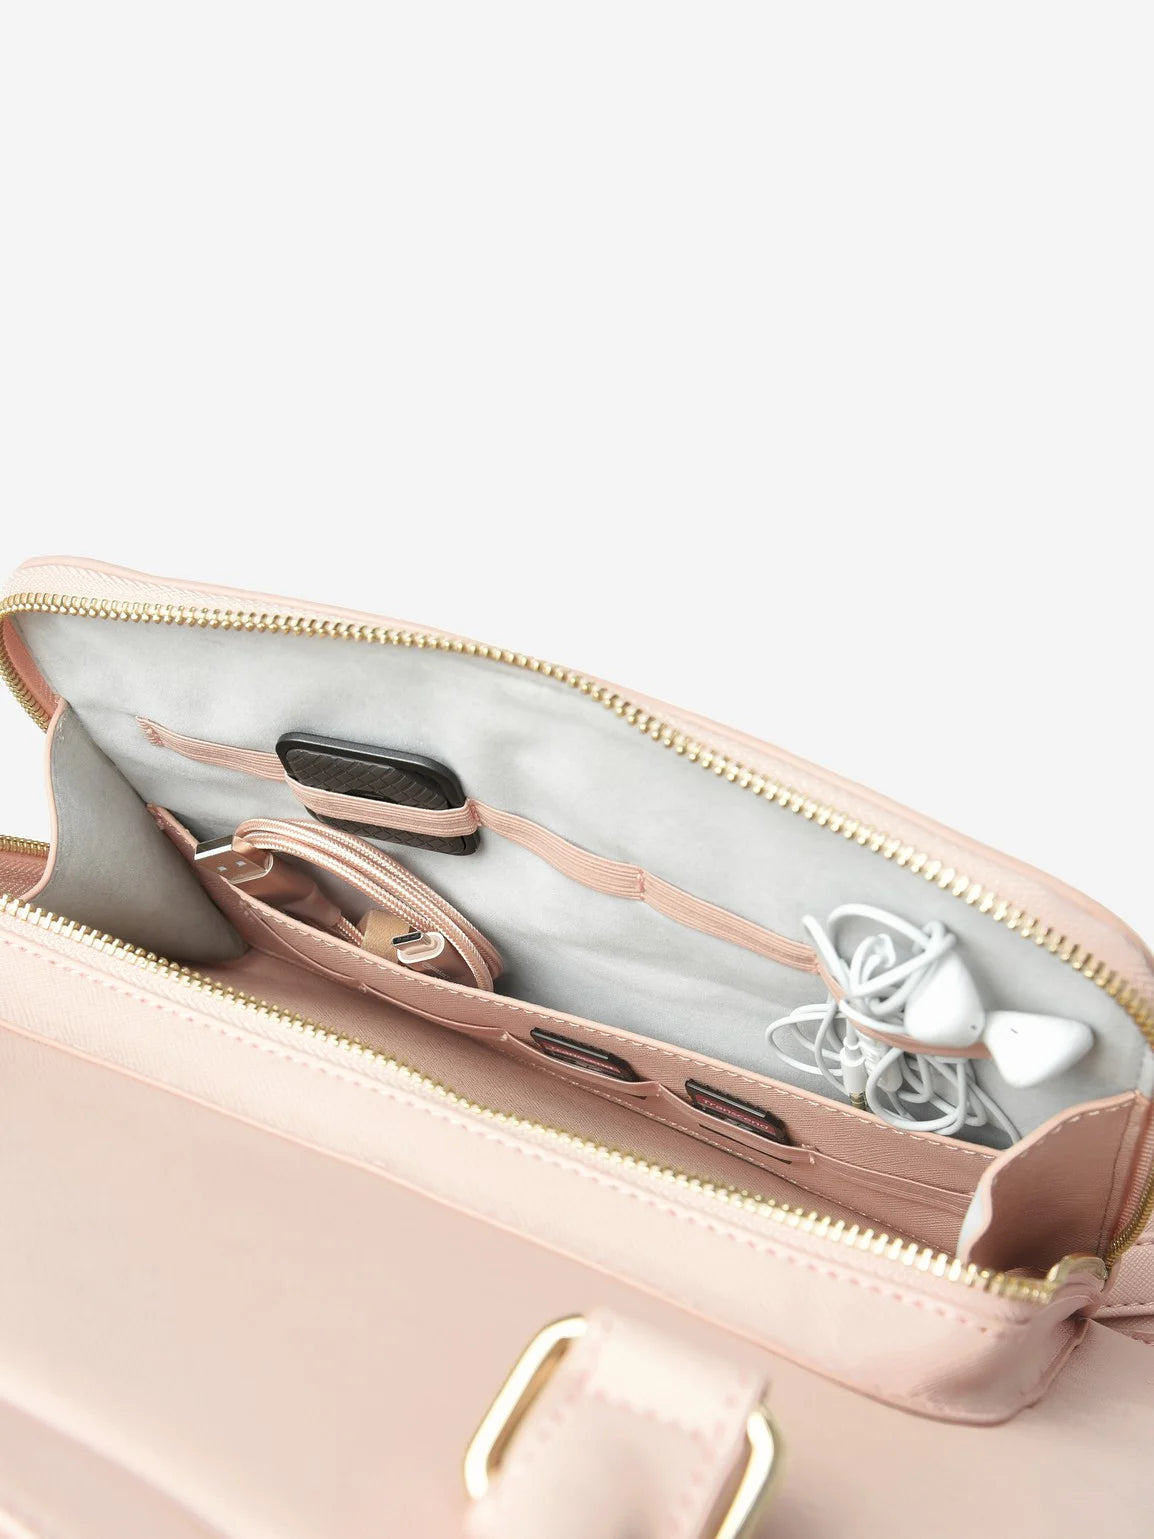 Stackers. Blush & Gold Laptop Bag *STOCK DUE MARCH* - timeframedclocks